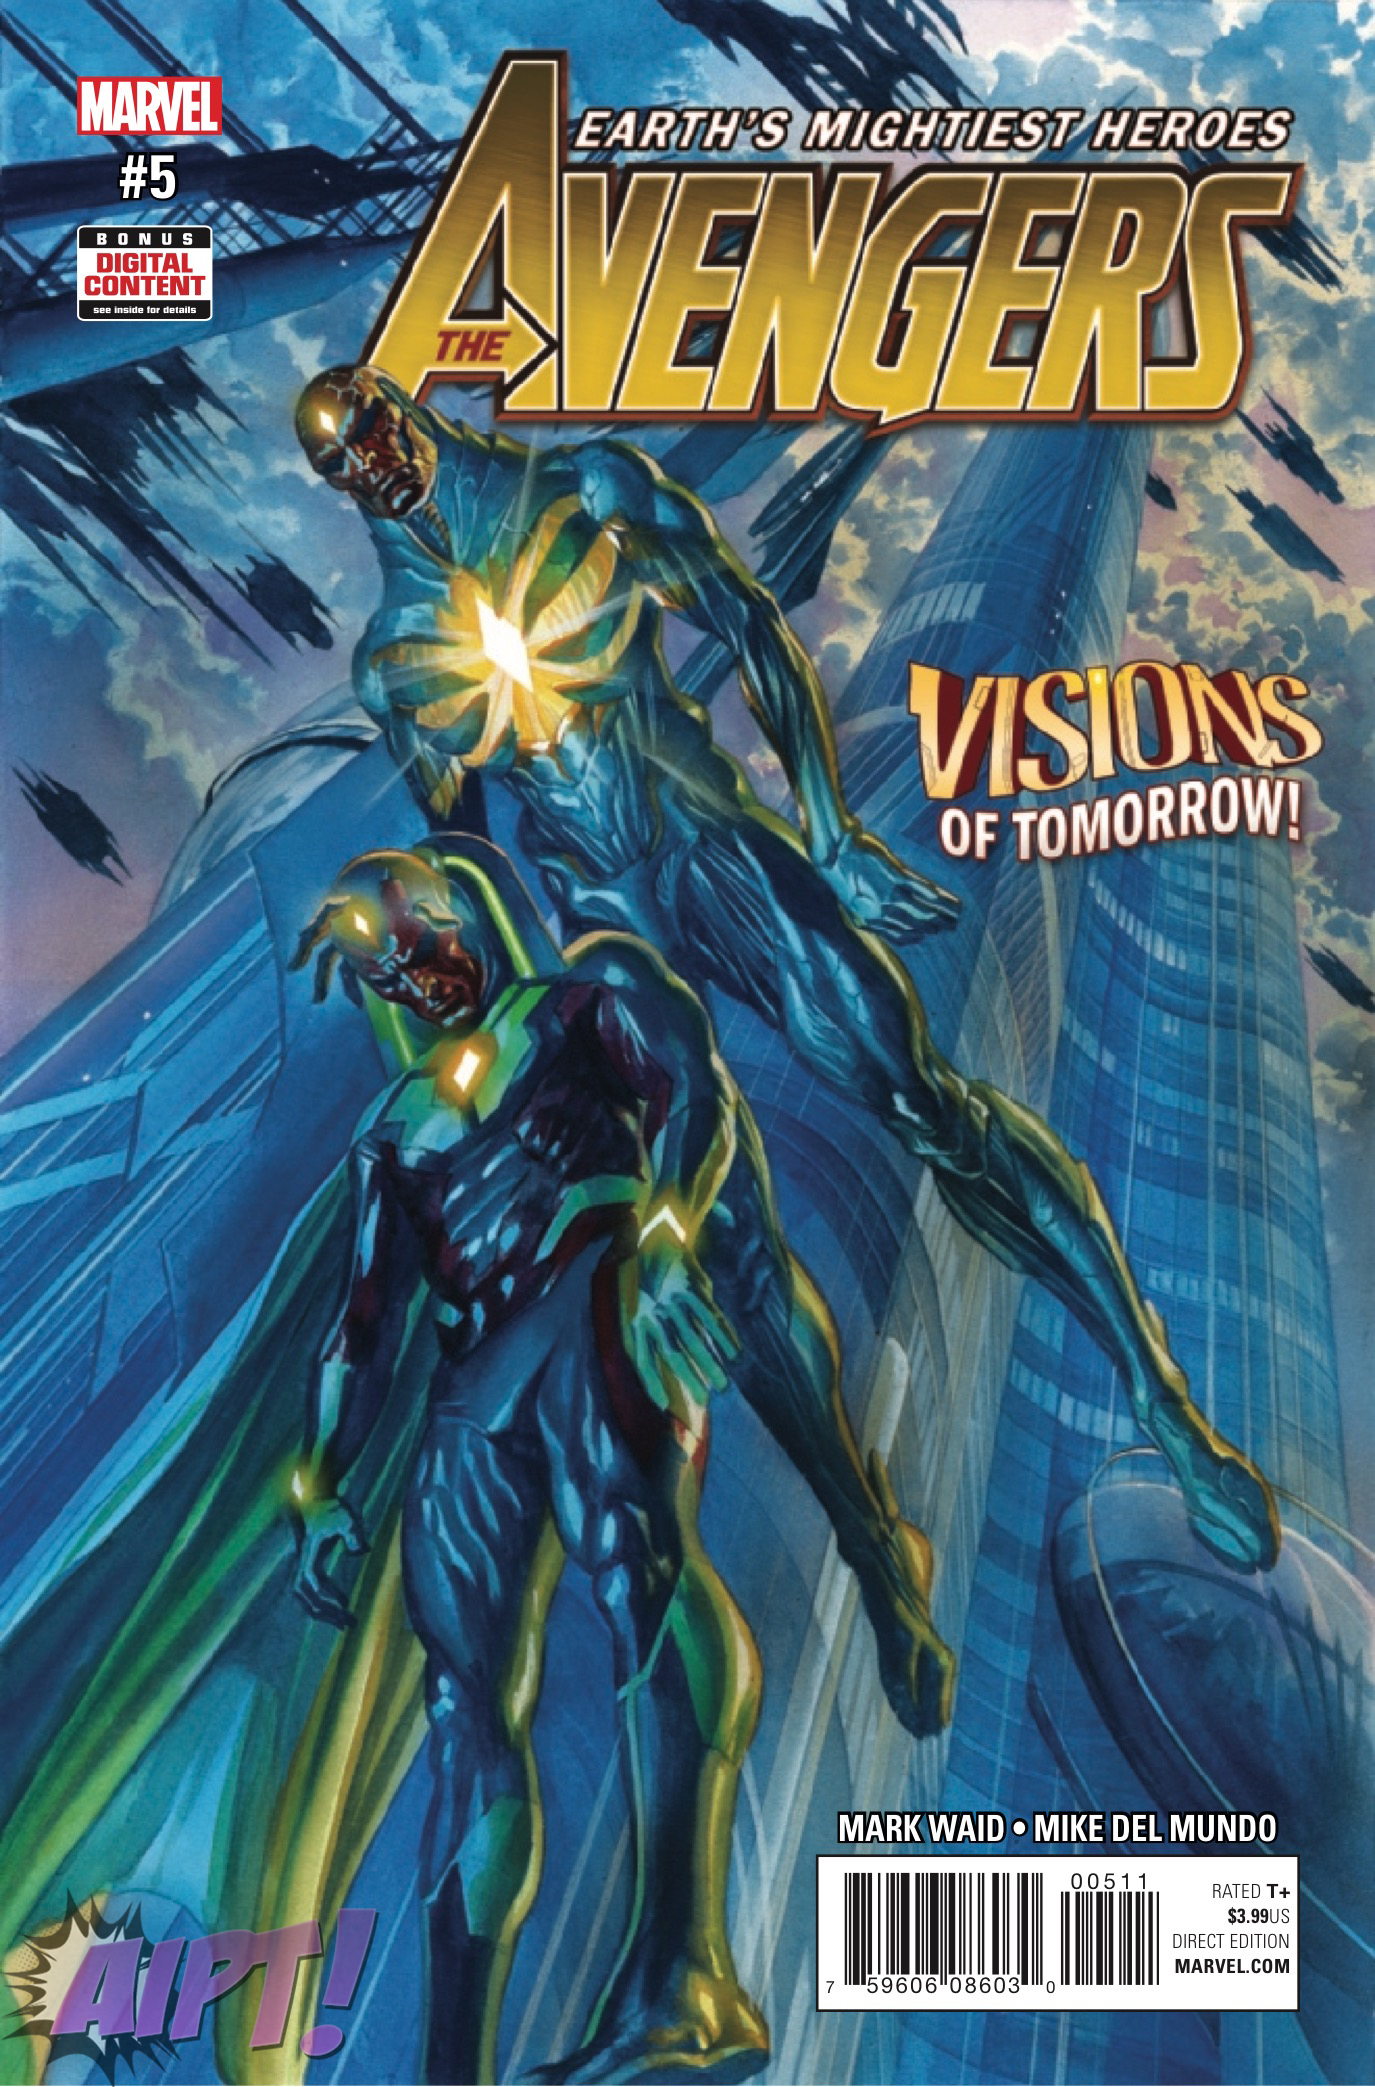 Avengers #5 Review